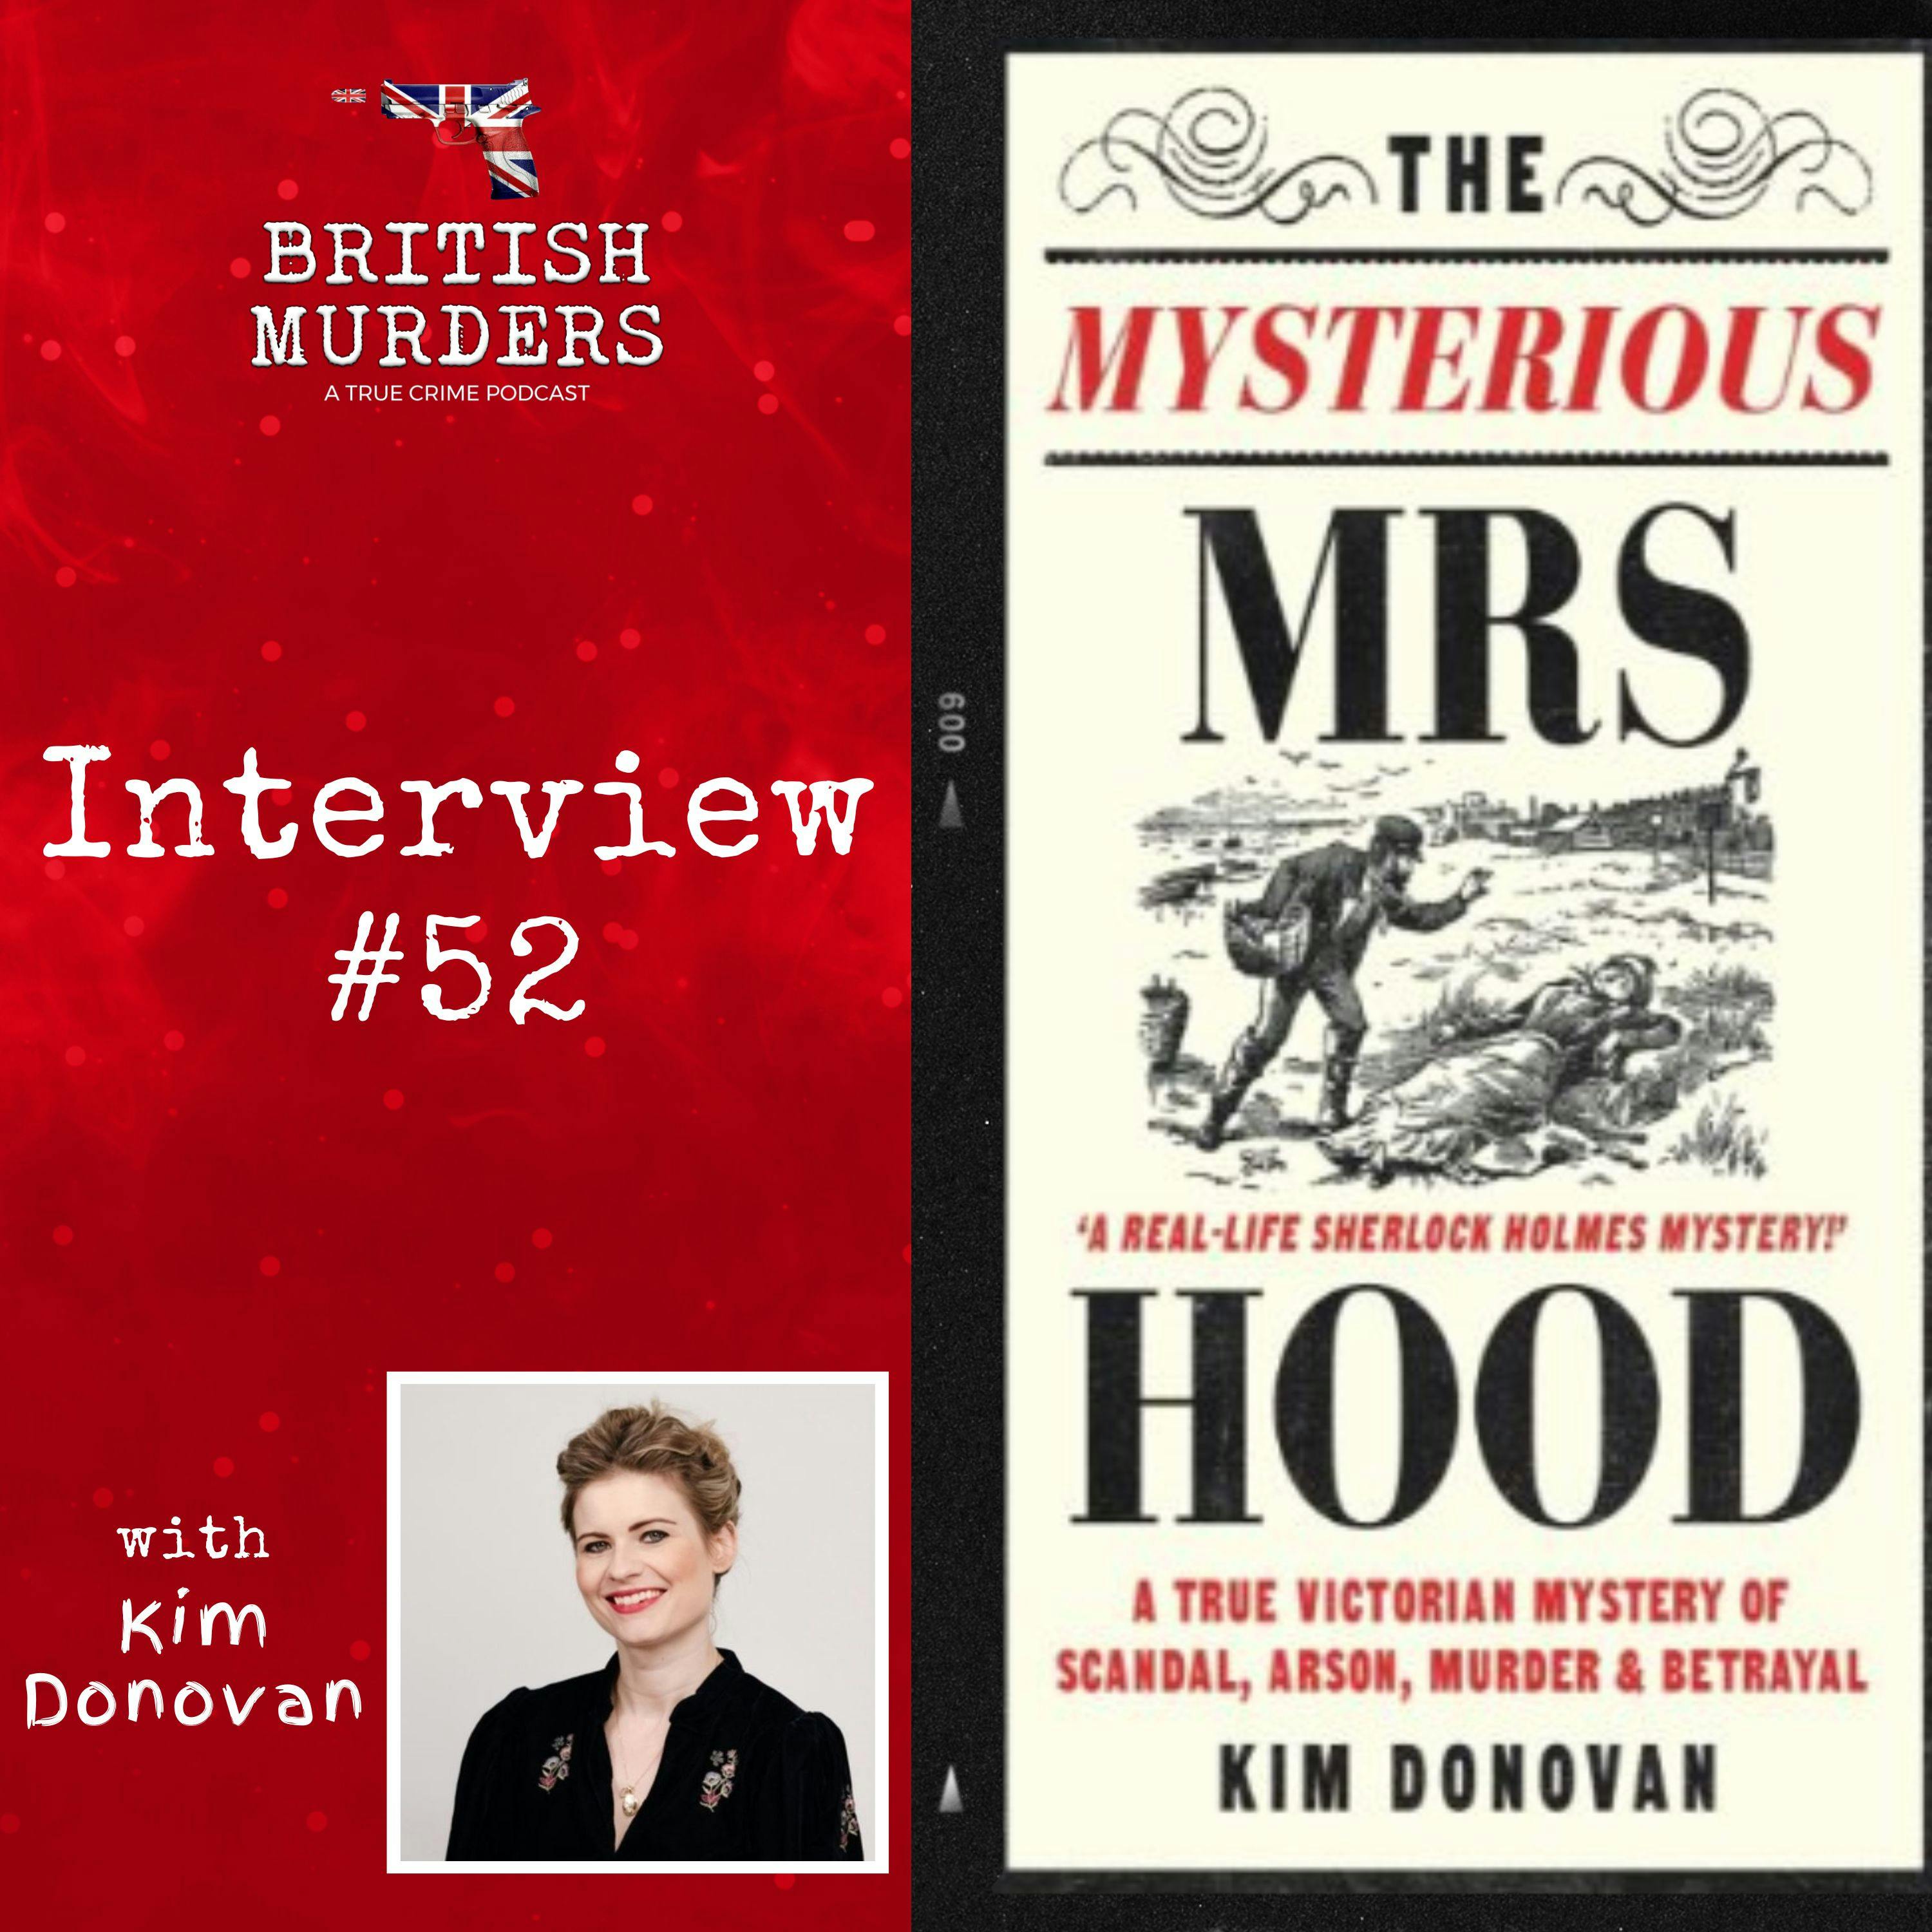 Interview #52 | The Mysterious Mrs Hood: Kim Donovan discusses writing about her great-great aunt’s murder